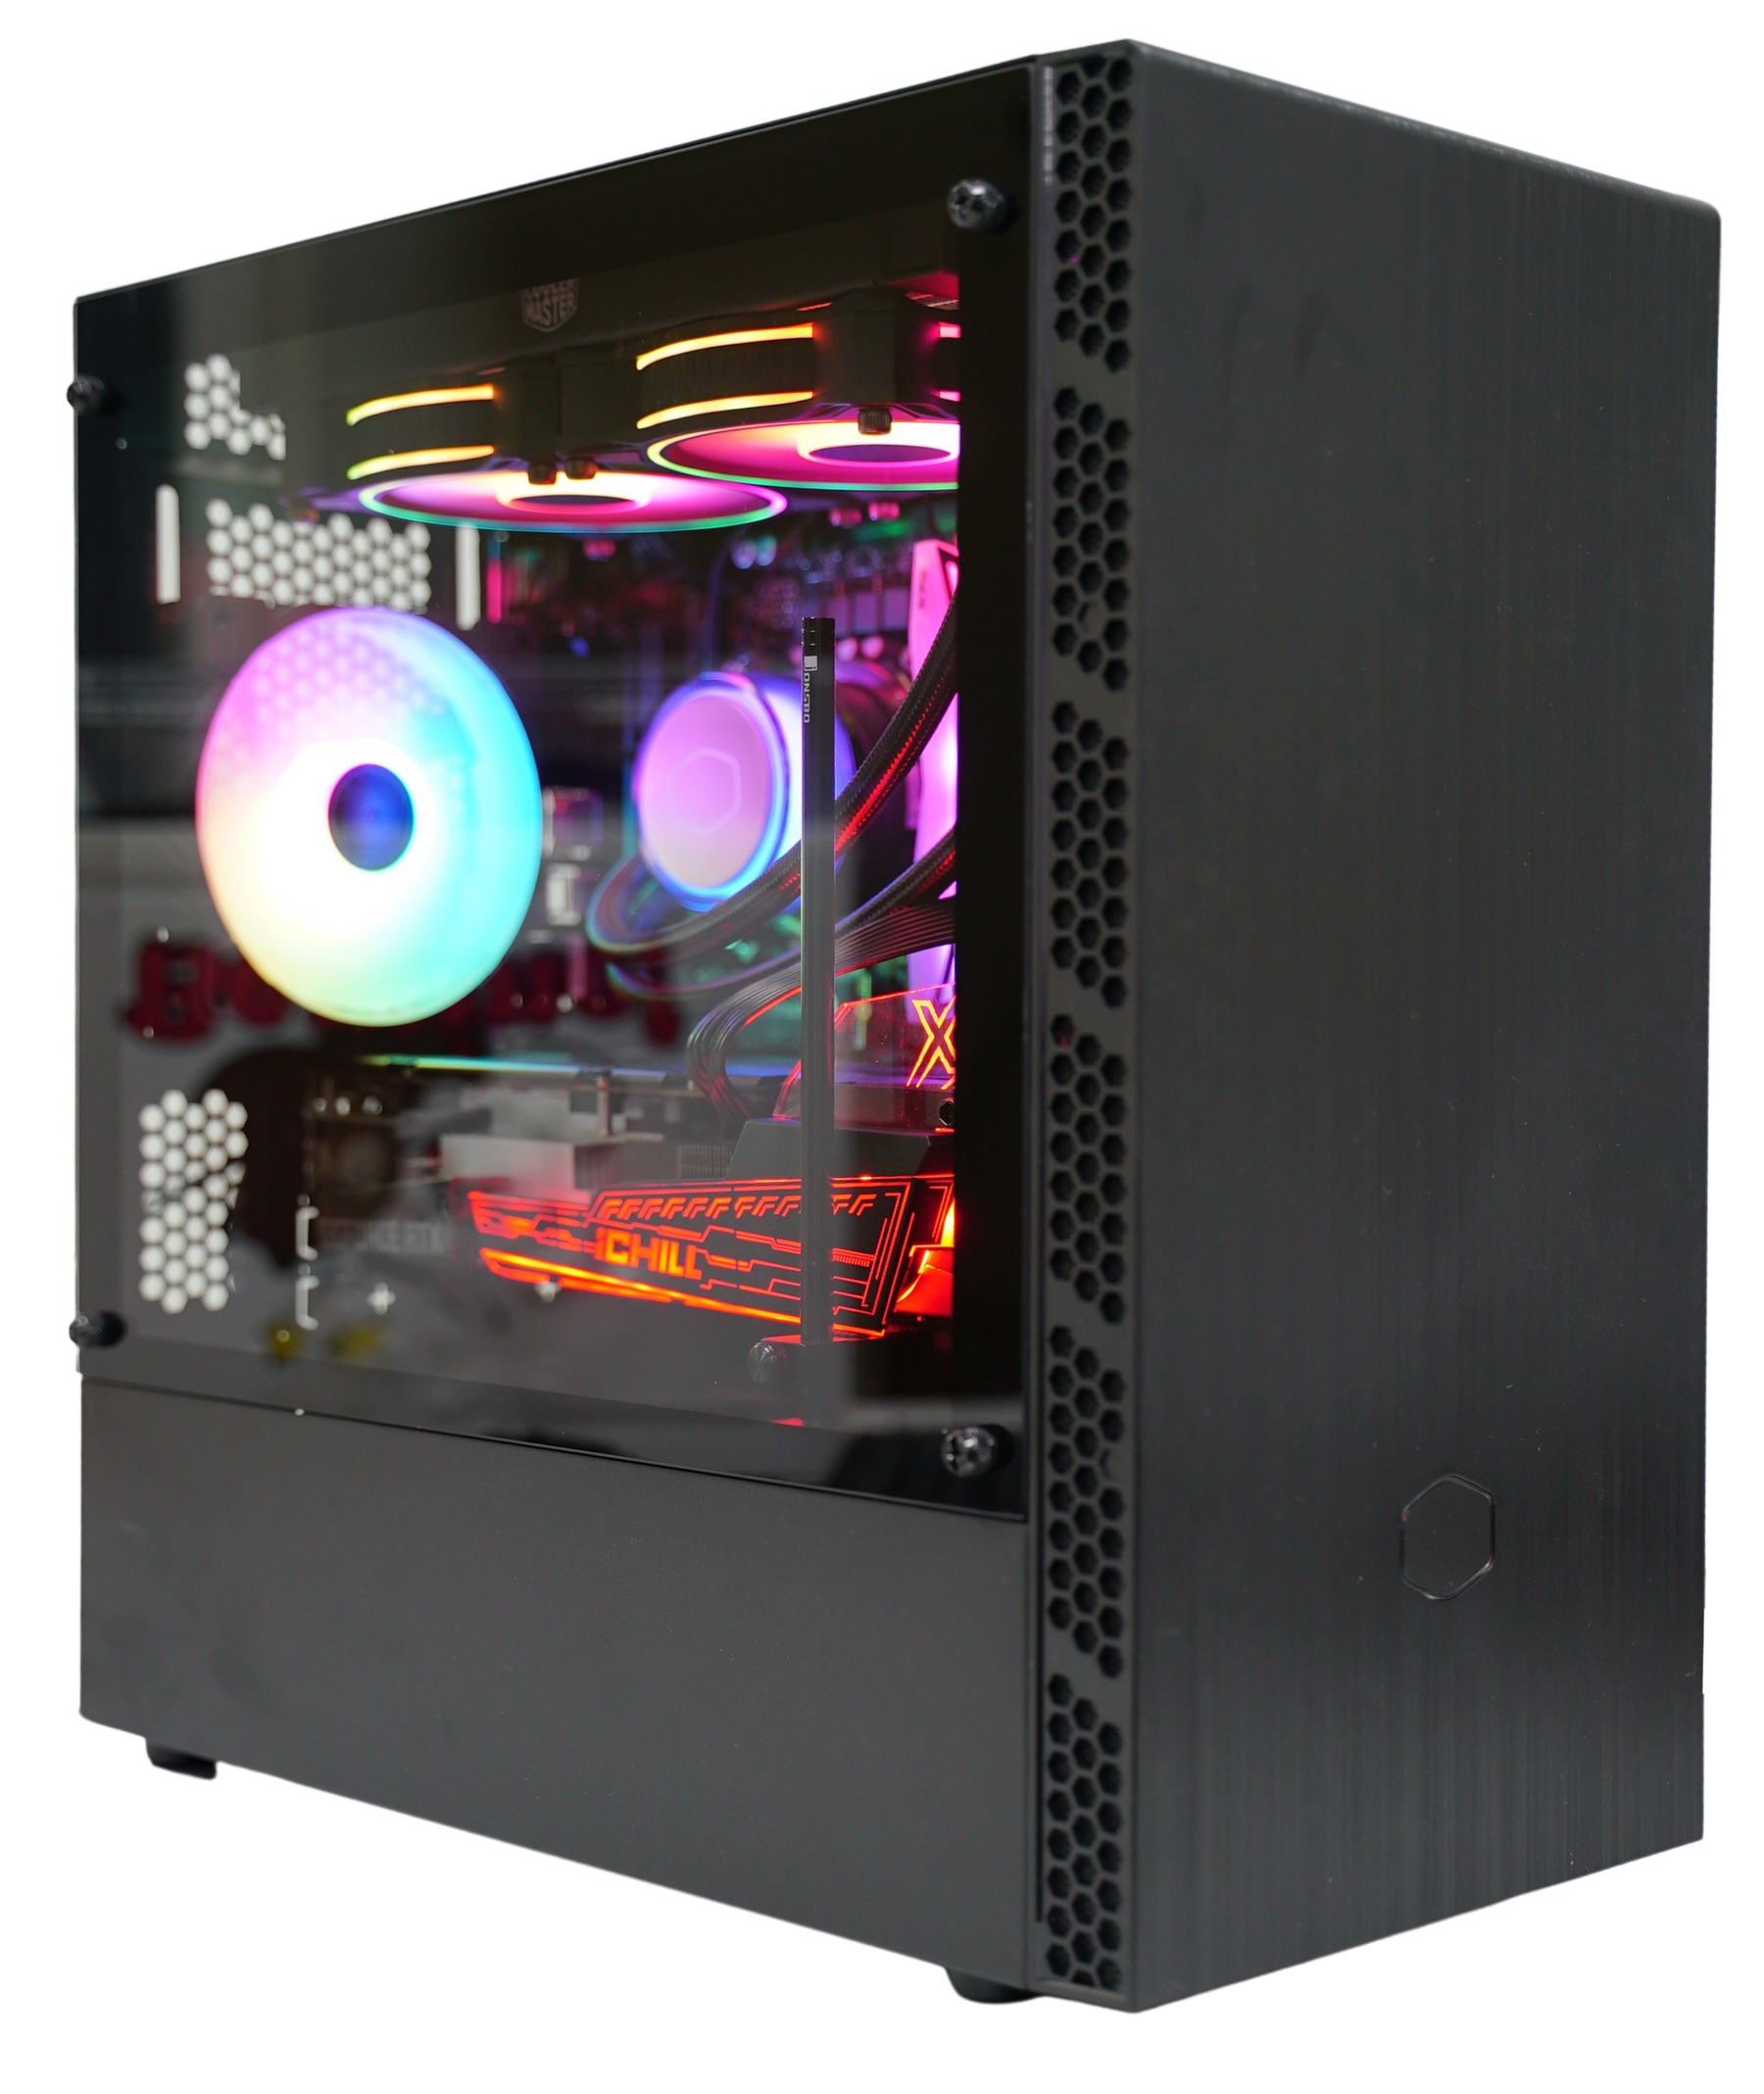 IronClad <b>Destroyer</b> <br> Mid-size Gaming Tower PC